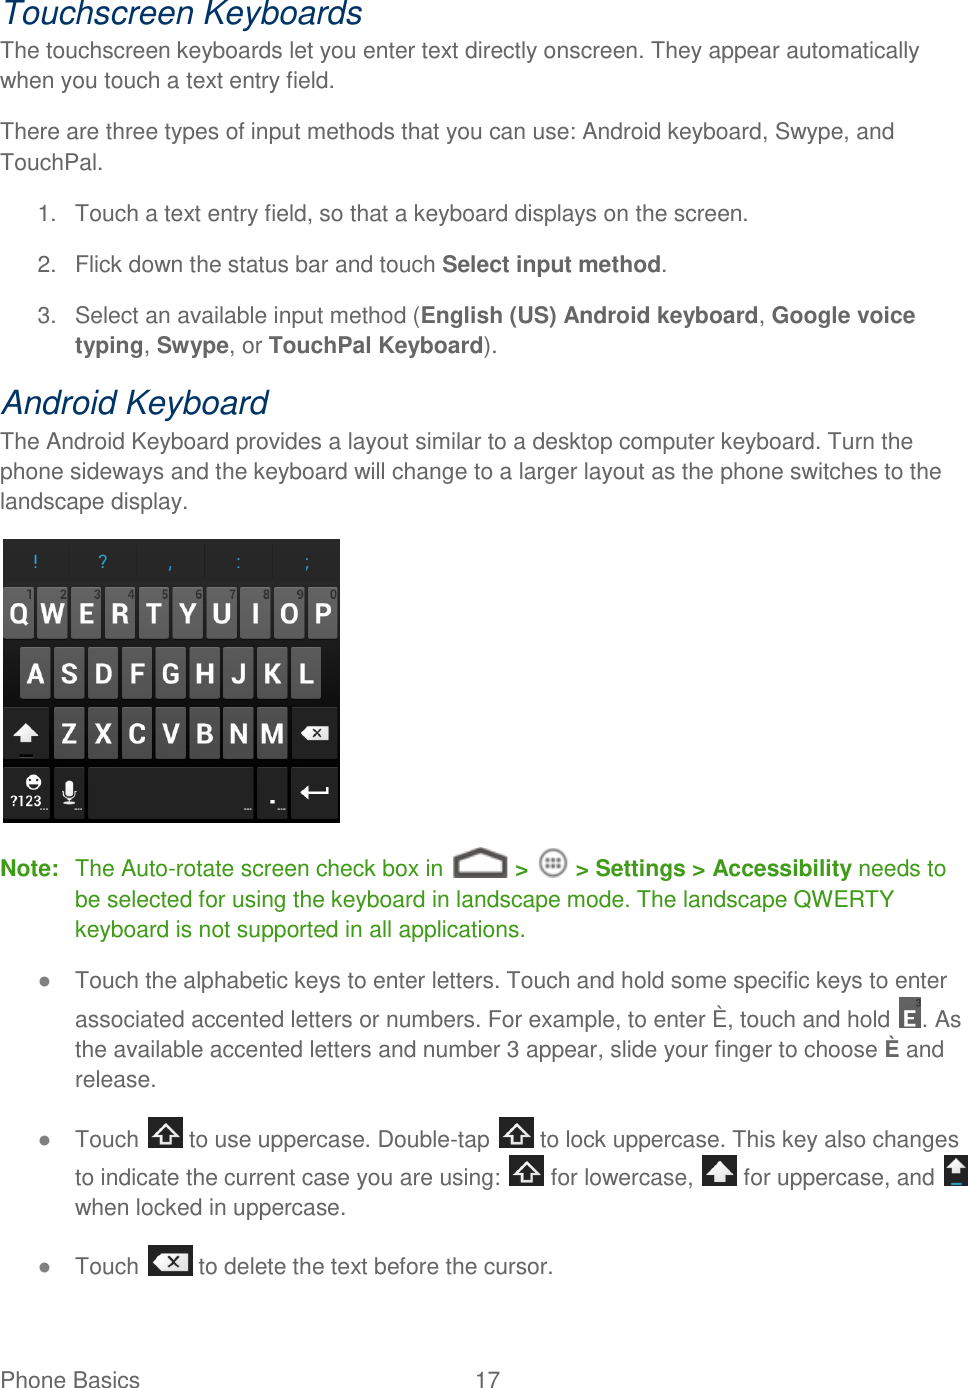 Phone Basics  17   Touchscreen Keyboards The touchscreen keyboards let you enter text directly onscreen. They appear automatically when you touch a text entry field. There are three types of input methods that you can use: Android keyboard, Swype, and TouchPal. 1.  Touch a text entry field, so that a keyboard displays on the screen. 2.  Flick down the status bar and touch Select input method. 3.  Select an available input method (English (US) Android keyboard, Google voice typing, Swype, or TouchPal Keyboard). Android Keyboard The Android Keyboard provides a layout similar to a desktop computer keyboard. Turn the phone sideways and the keyboard will change to a larger layout as the phone switches to the landscape display.  Note:  The Auto-rotate screen check box in   &gt;   &gt; Settings &gt; Accessibility needs to be selected for using the keyboard in landscape mode. The landscape QWERTY keyboard is not supported in all applications. ● Touch the alphabetic keys to enter letters. Touch and hold some specific keys to enter associated accented letters or numbers. For example, to enter È, touch and hold  . As the available accented letters and number 3 appear, slide your finger to choose È and release. ● Touch   to use uppercase. Double-tap   to lock uppercase. This key also changes to indicate the current case you are using:   for lowercase,   for uppercase, and   when locked in uppercase. ● Touch   to delete the text before the cursor. 